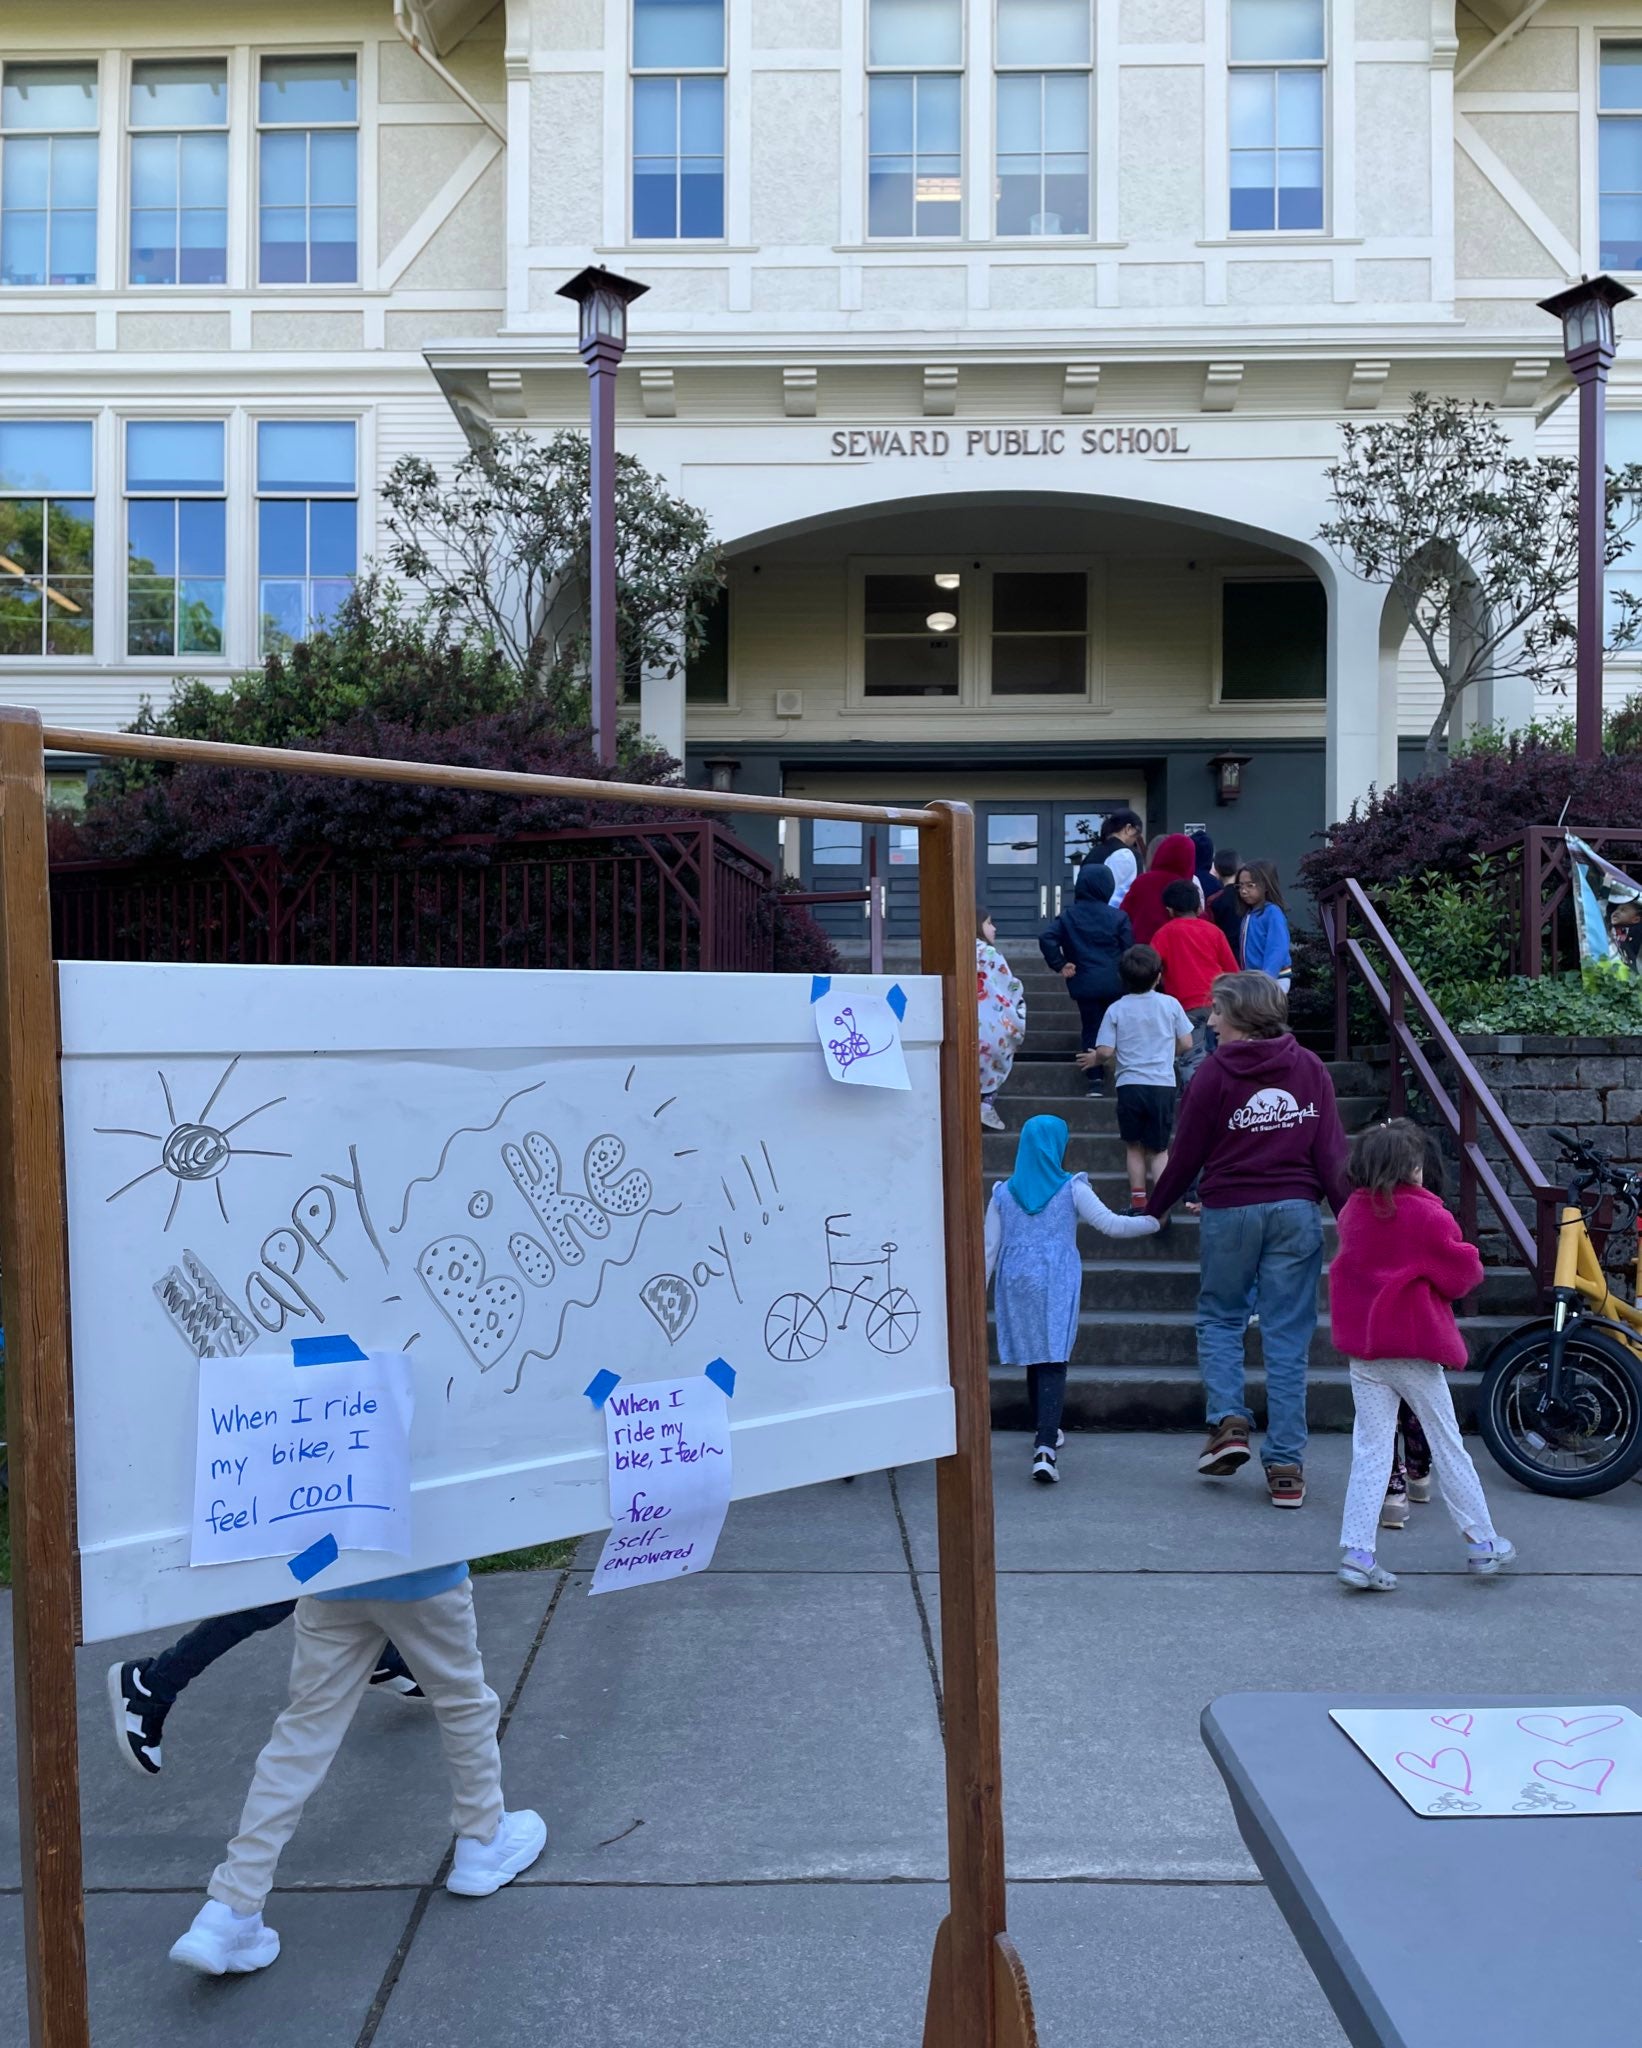 Sign in front of school says "Happy Bike Month" and features student notes. Student walk up steps into school in the background.